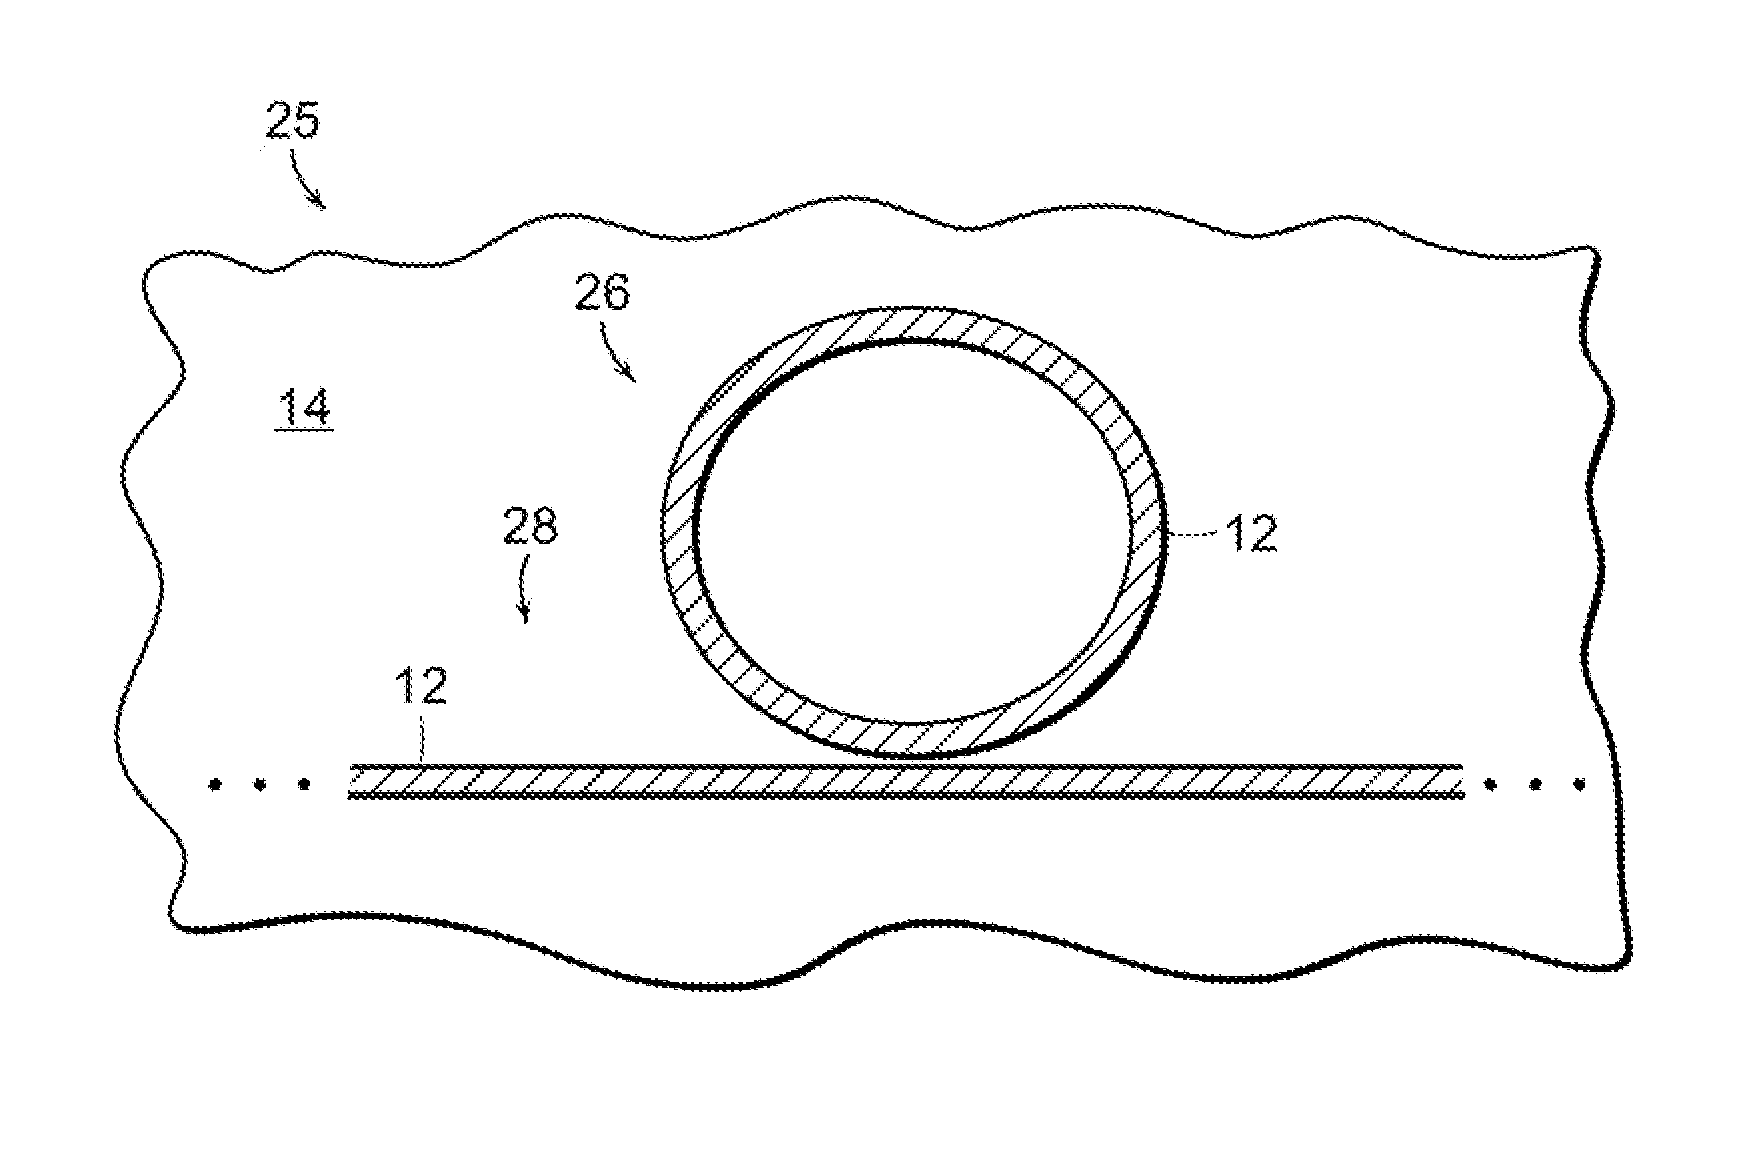 Athermal photonic waveguide with refractive index tuning